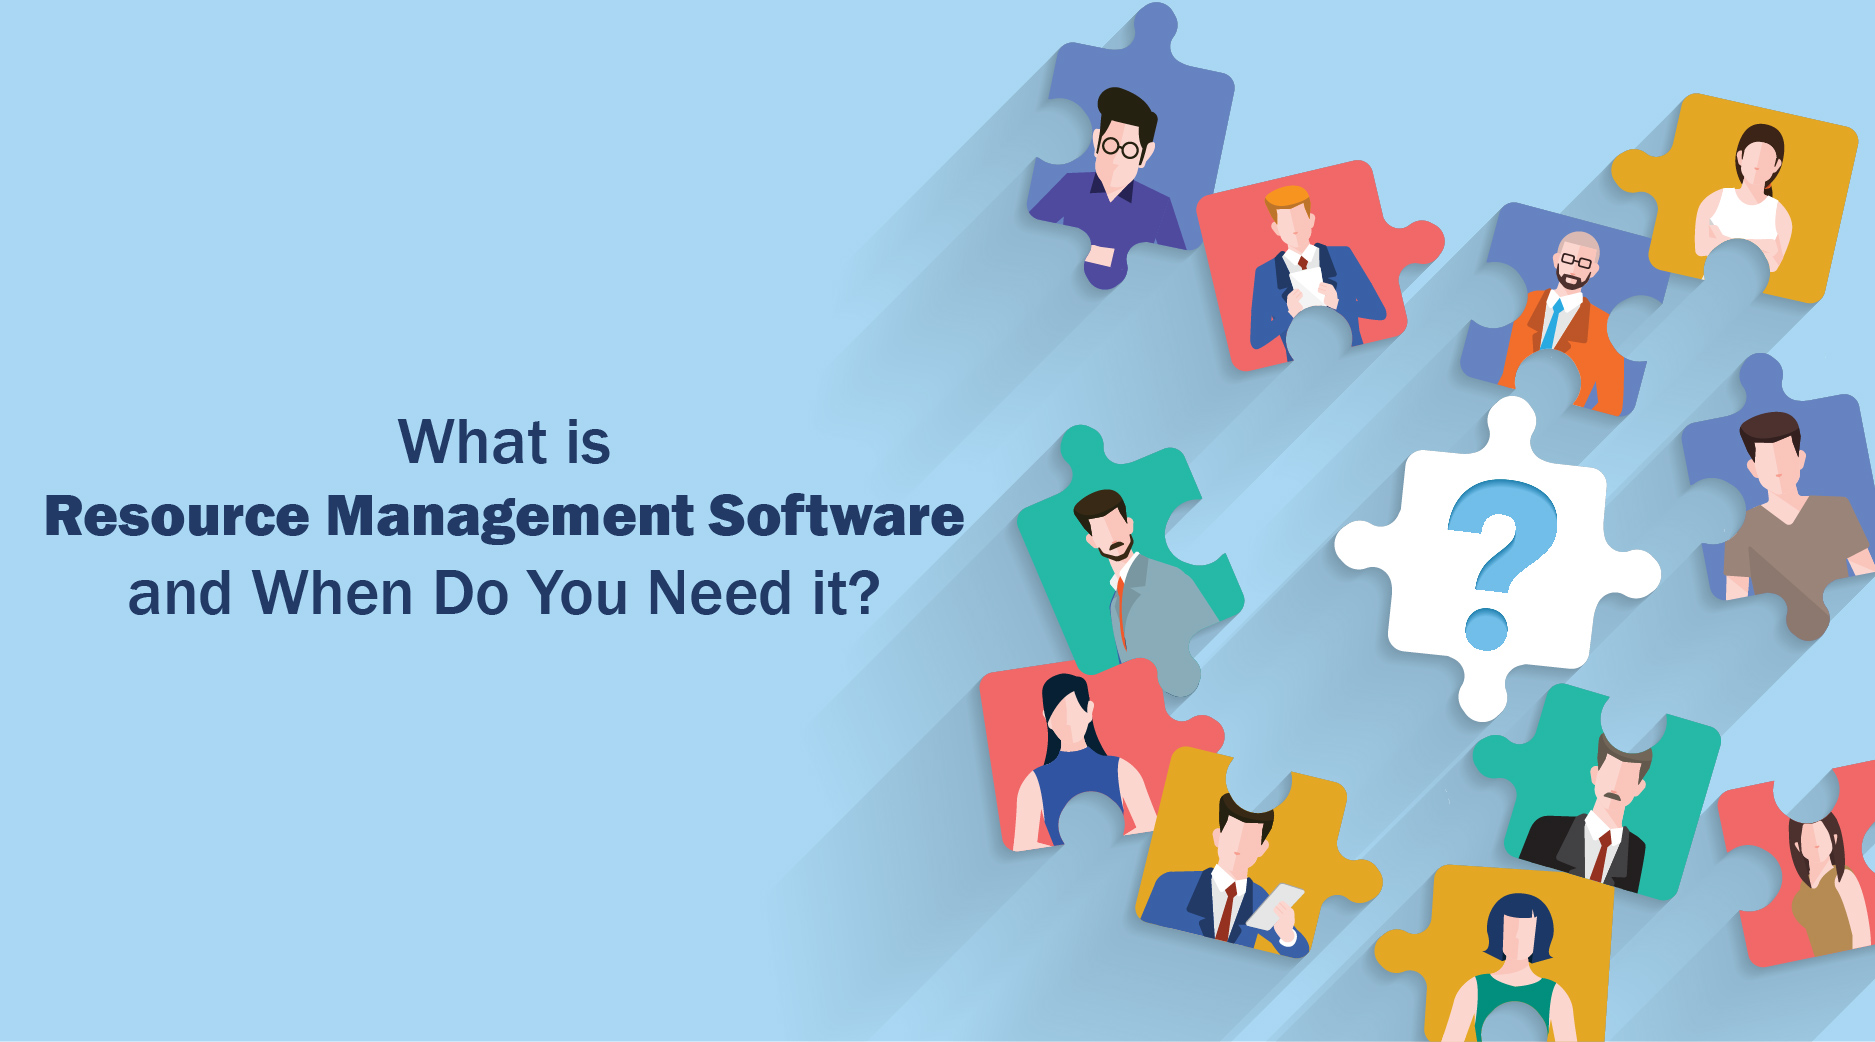 Resource Management Software: When and Why You Need It